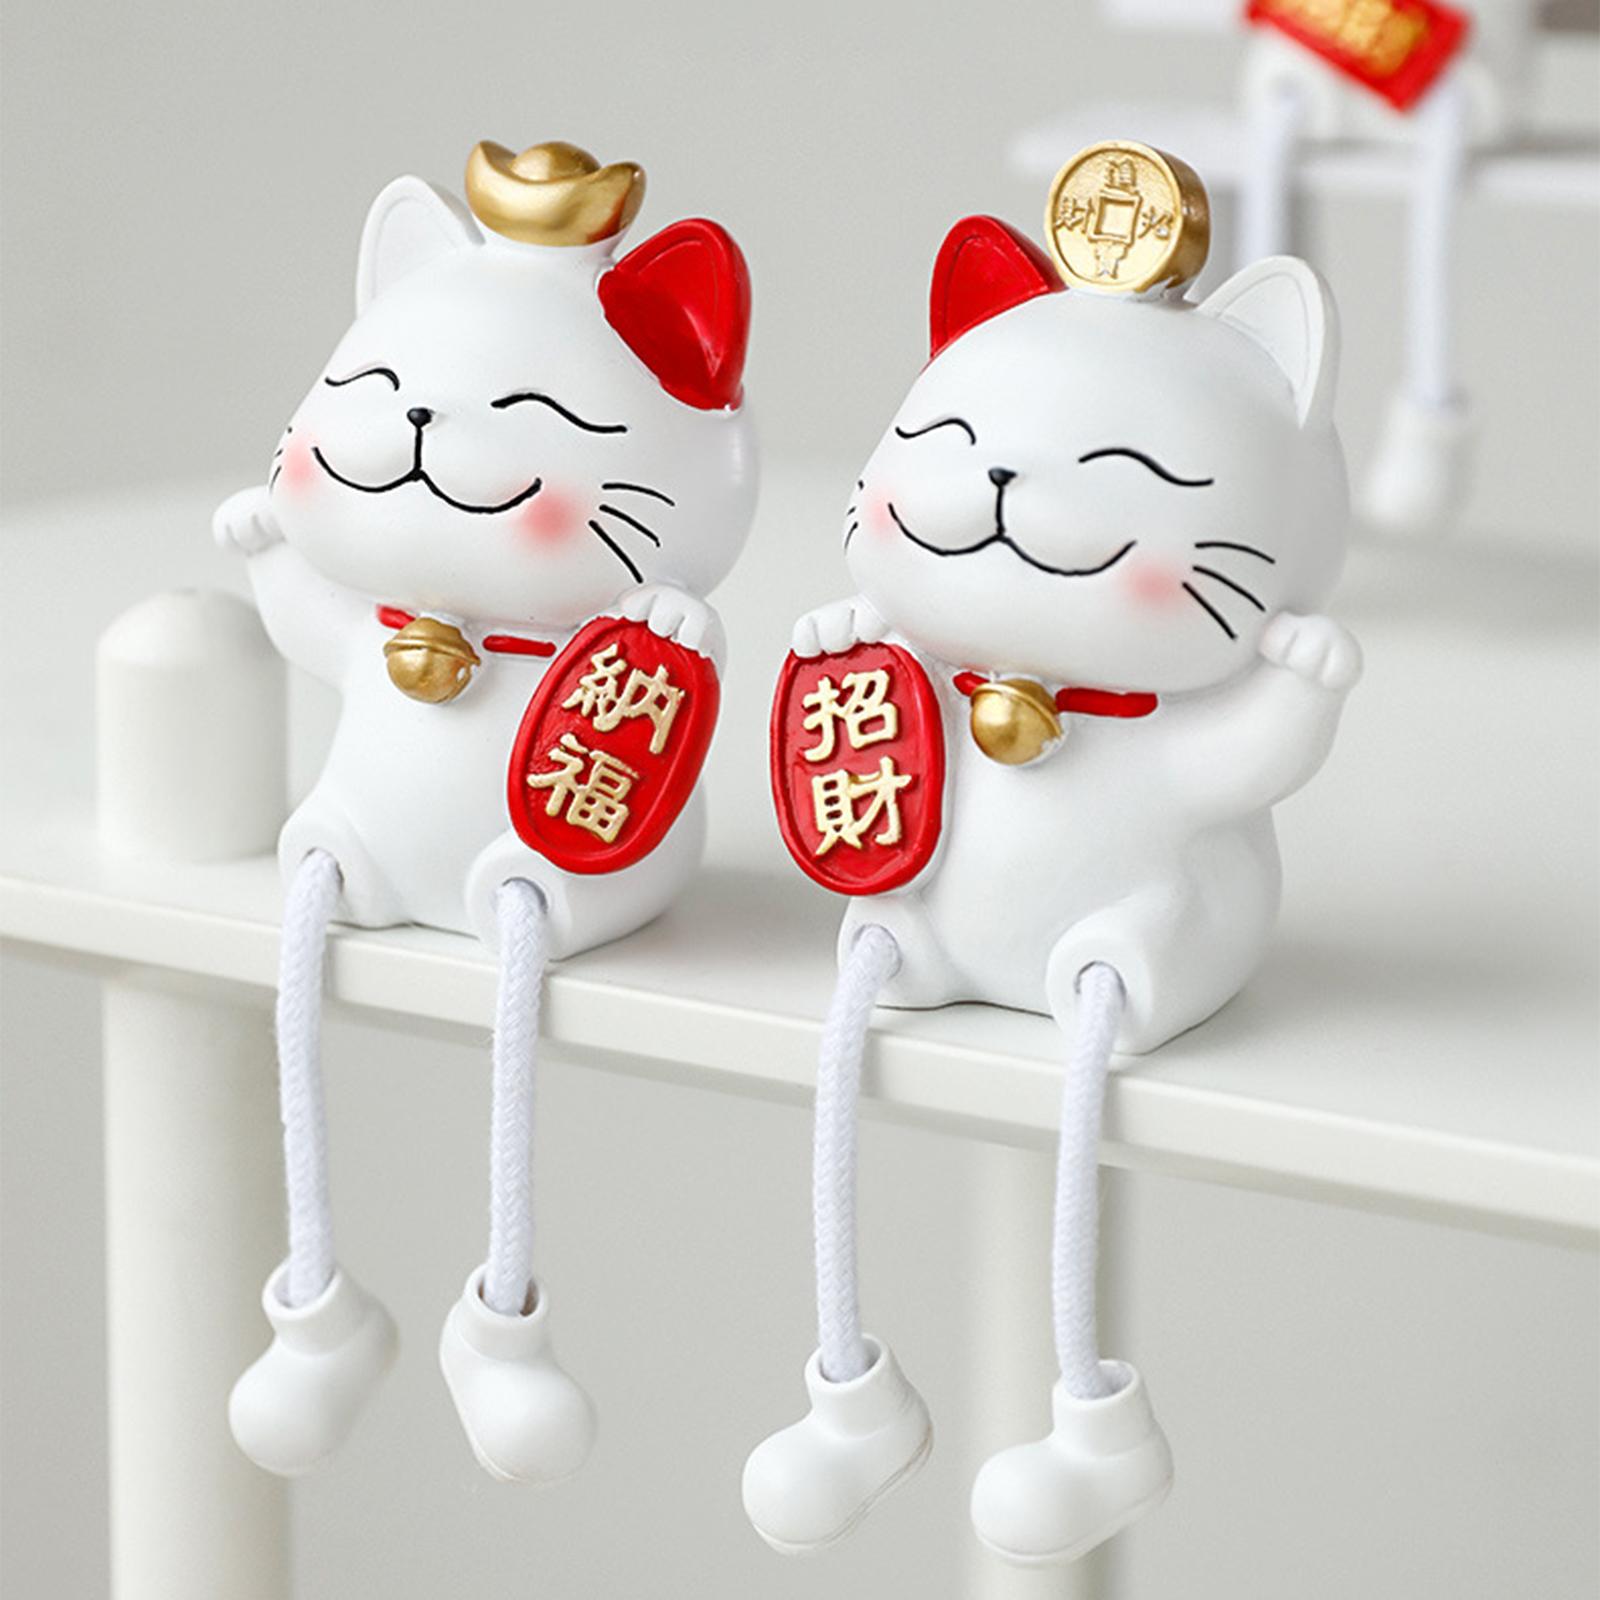 Lucky Cats Figurine Animal Statue Resin Sculpture for Living Room Decoration StyleA